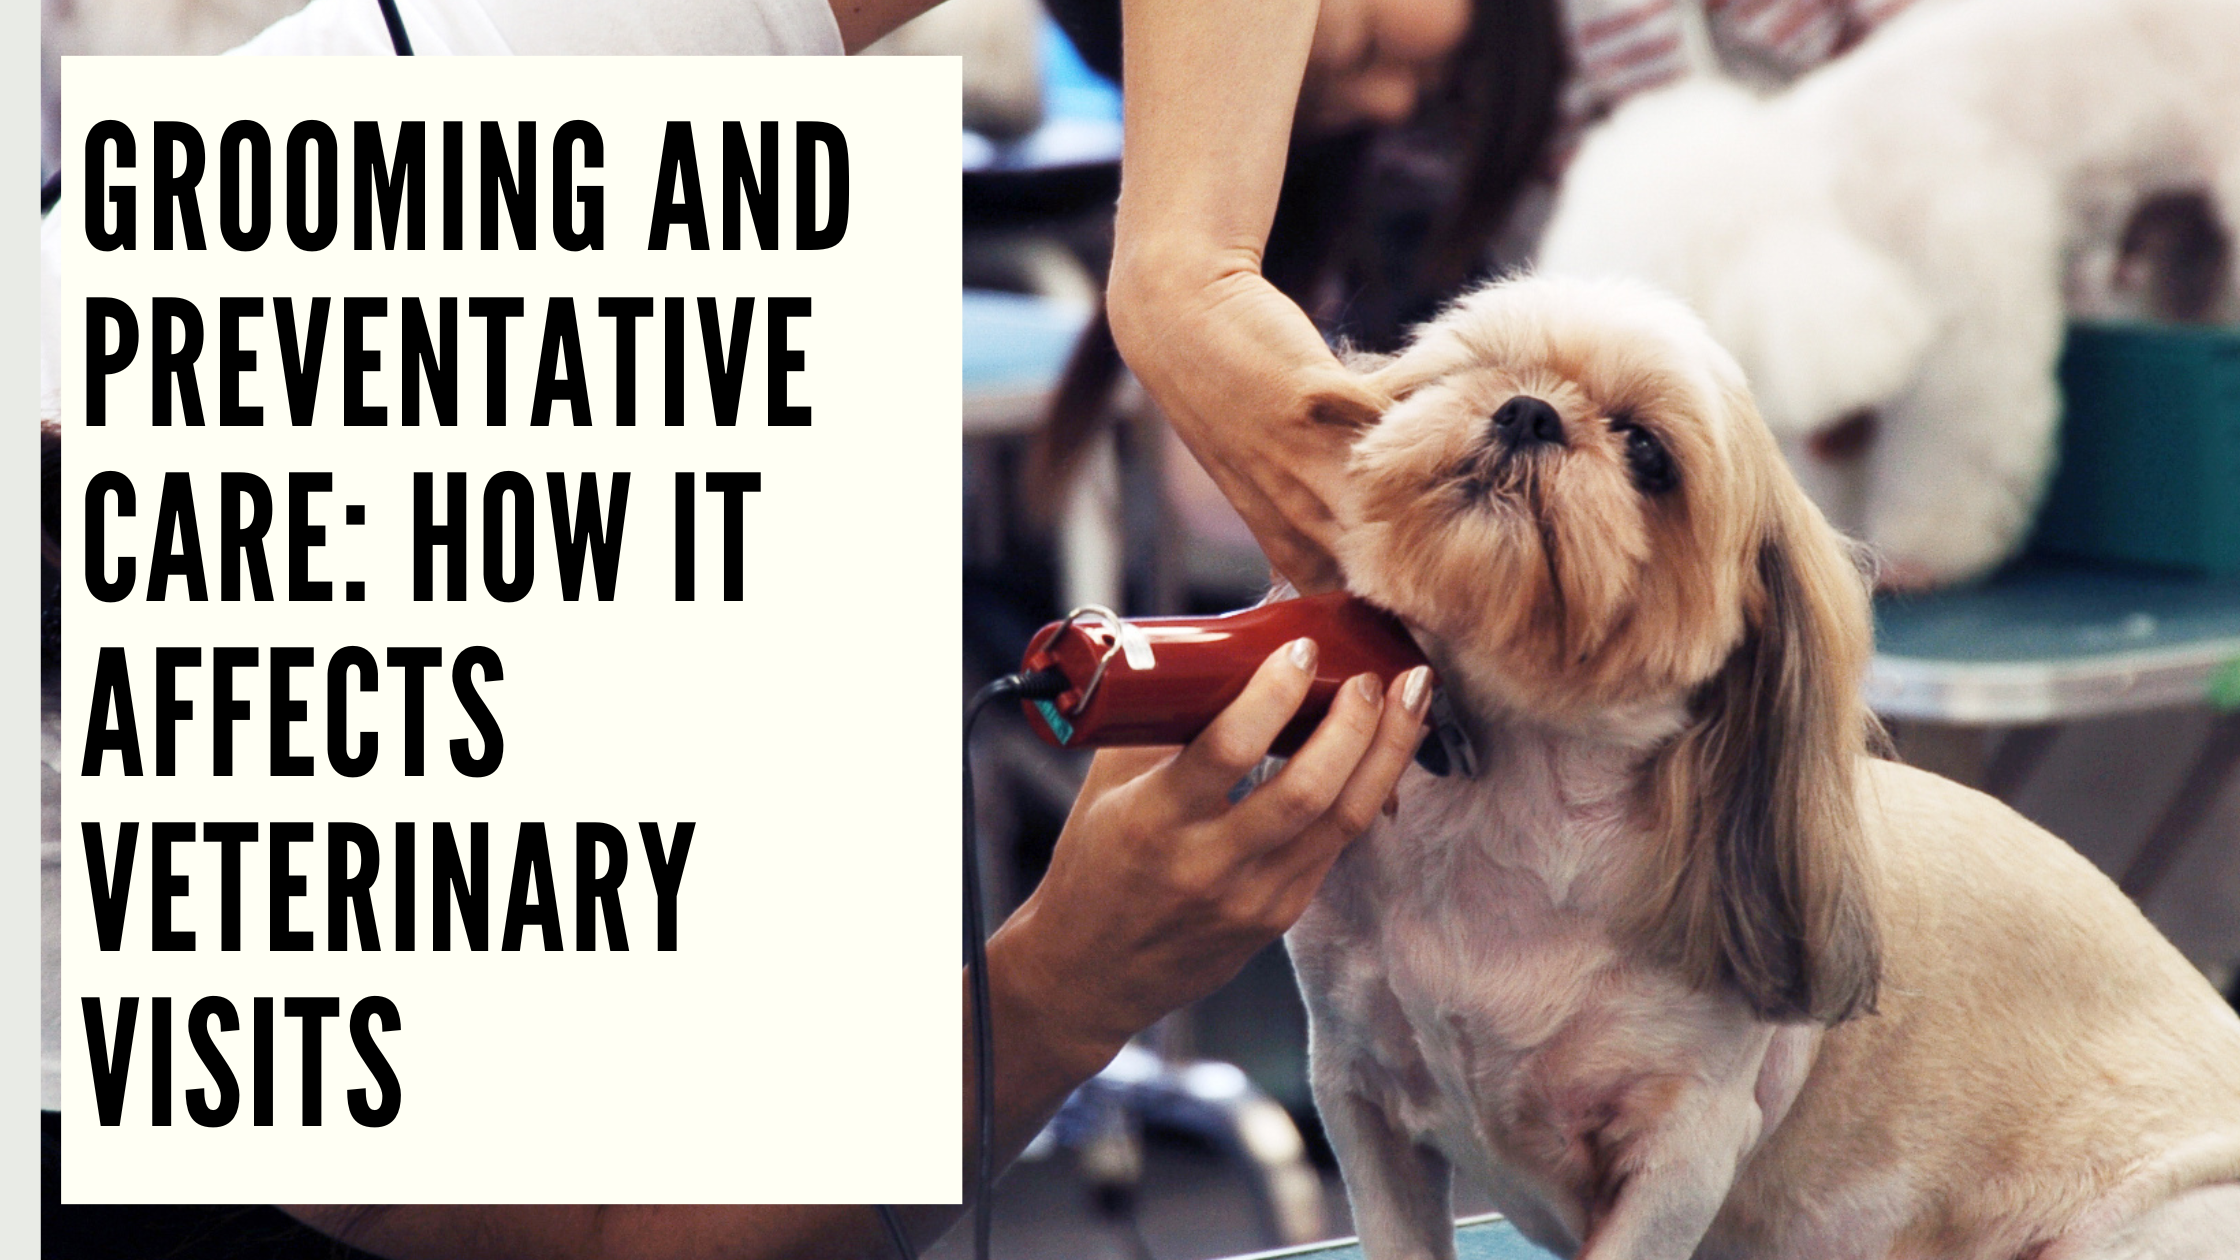 Grooming and Preventative Care How It Affects Veterinary Visits